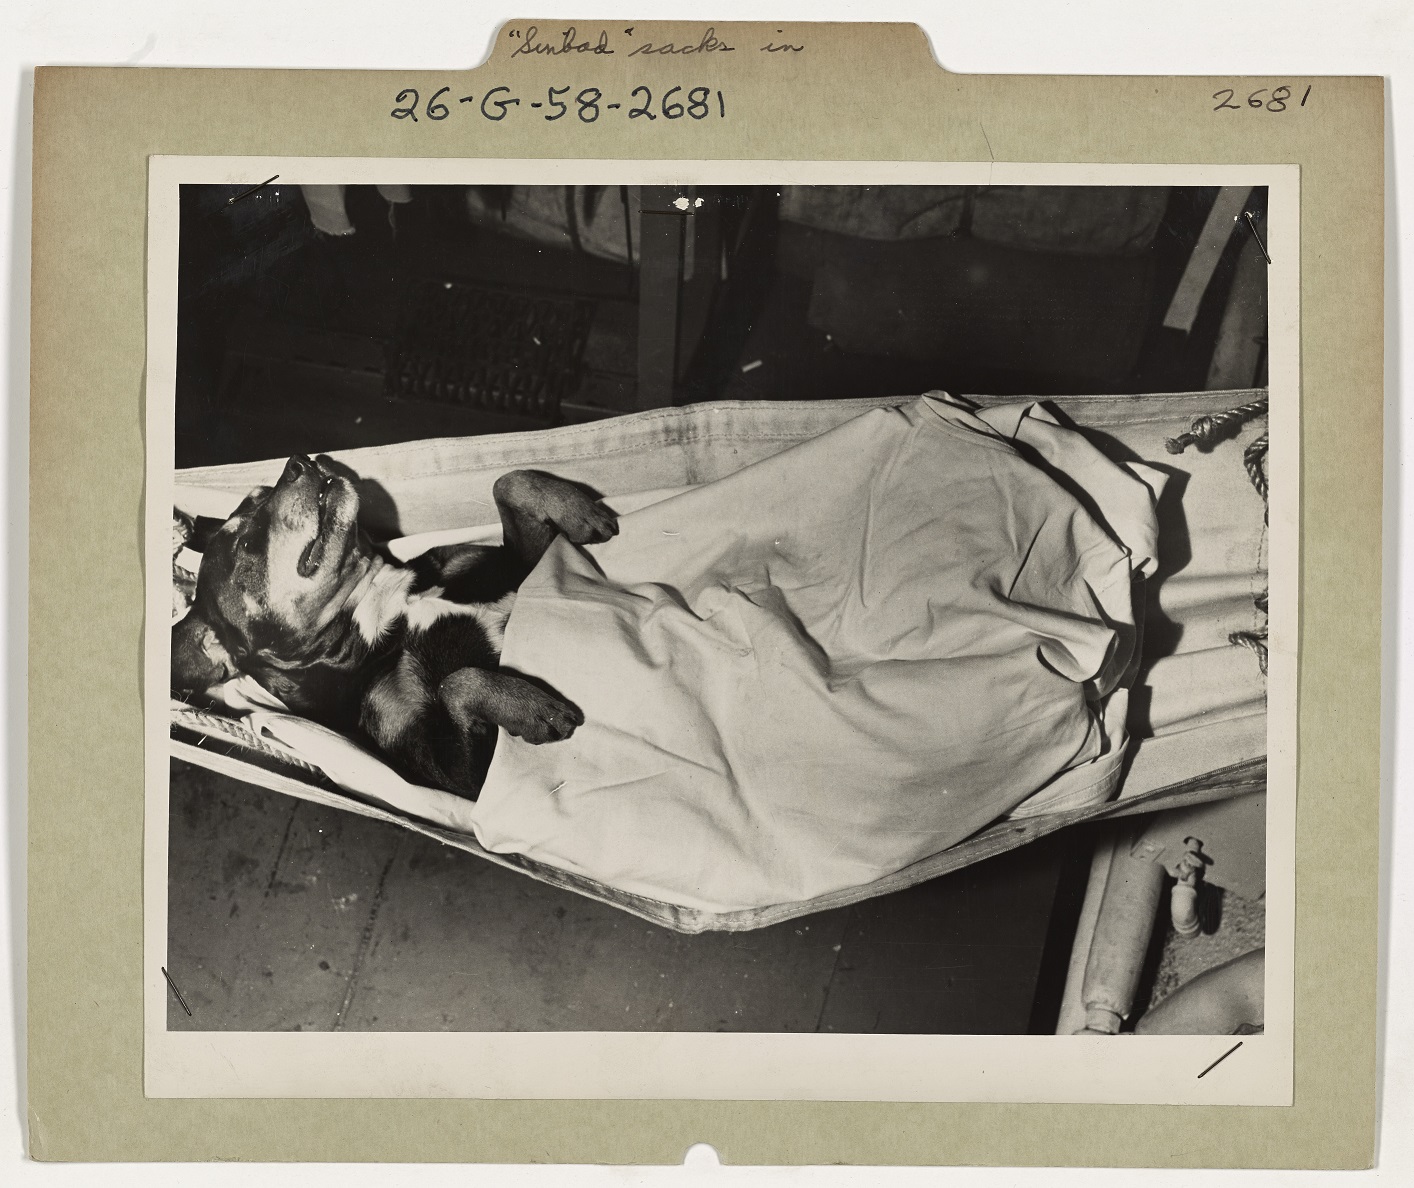 7.	Sinbad fast asleep in his hammock after a long day at sea on board the Campbell. (NARA)